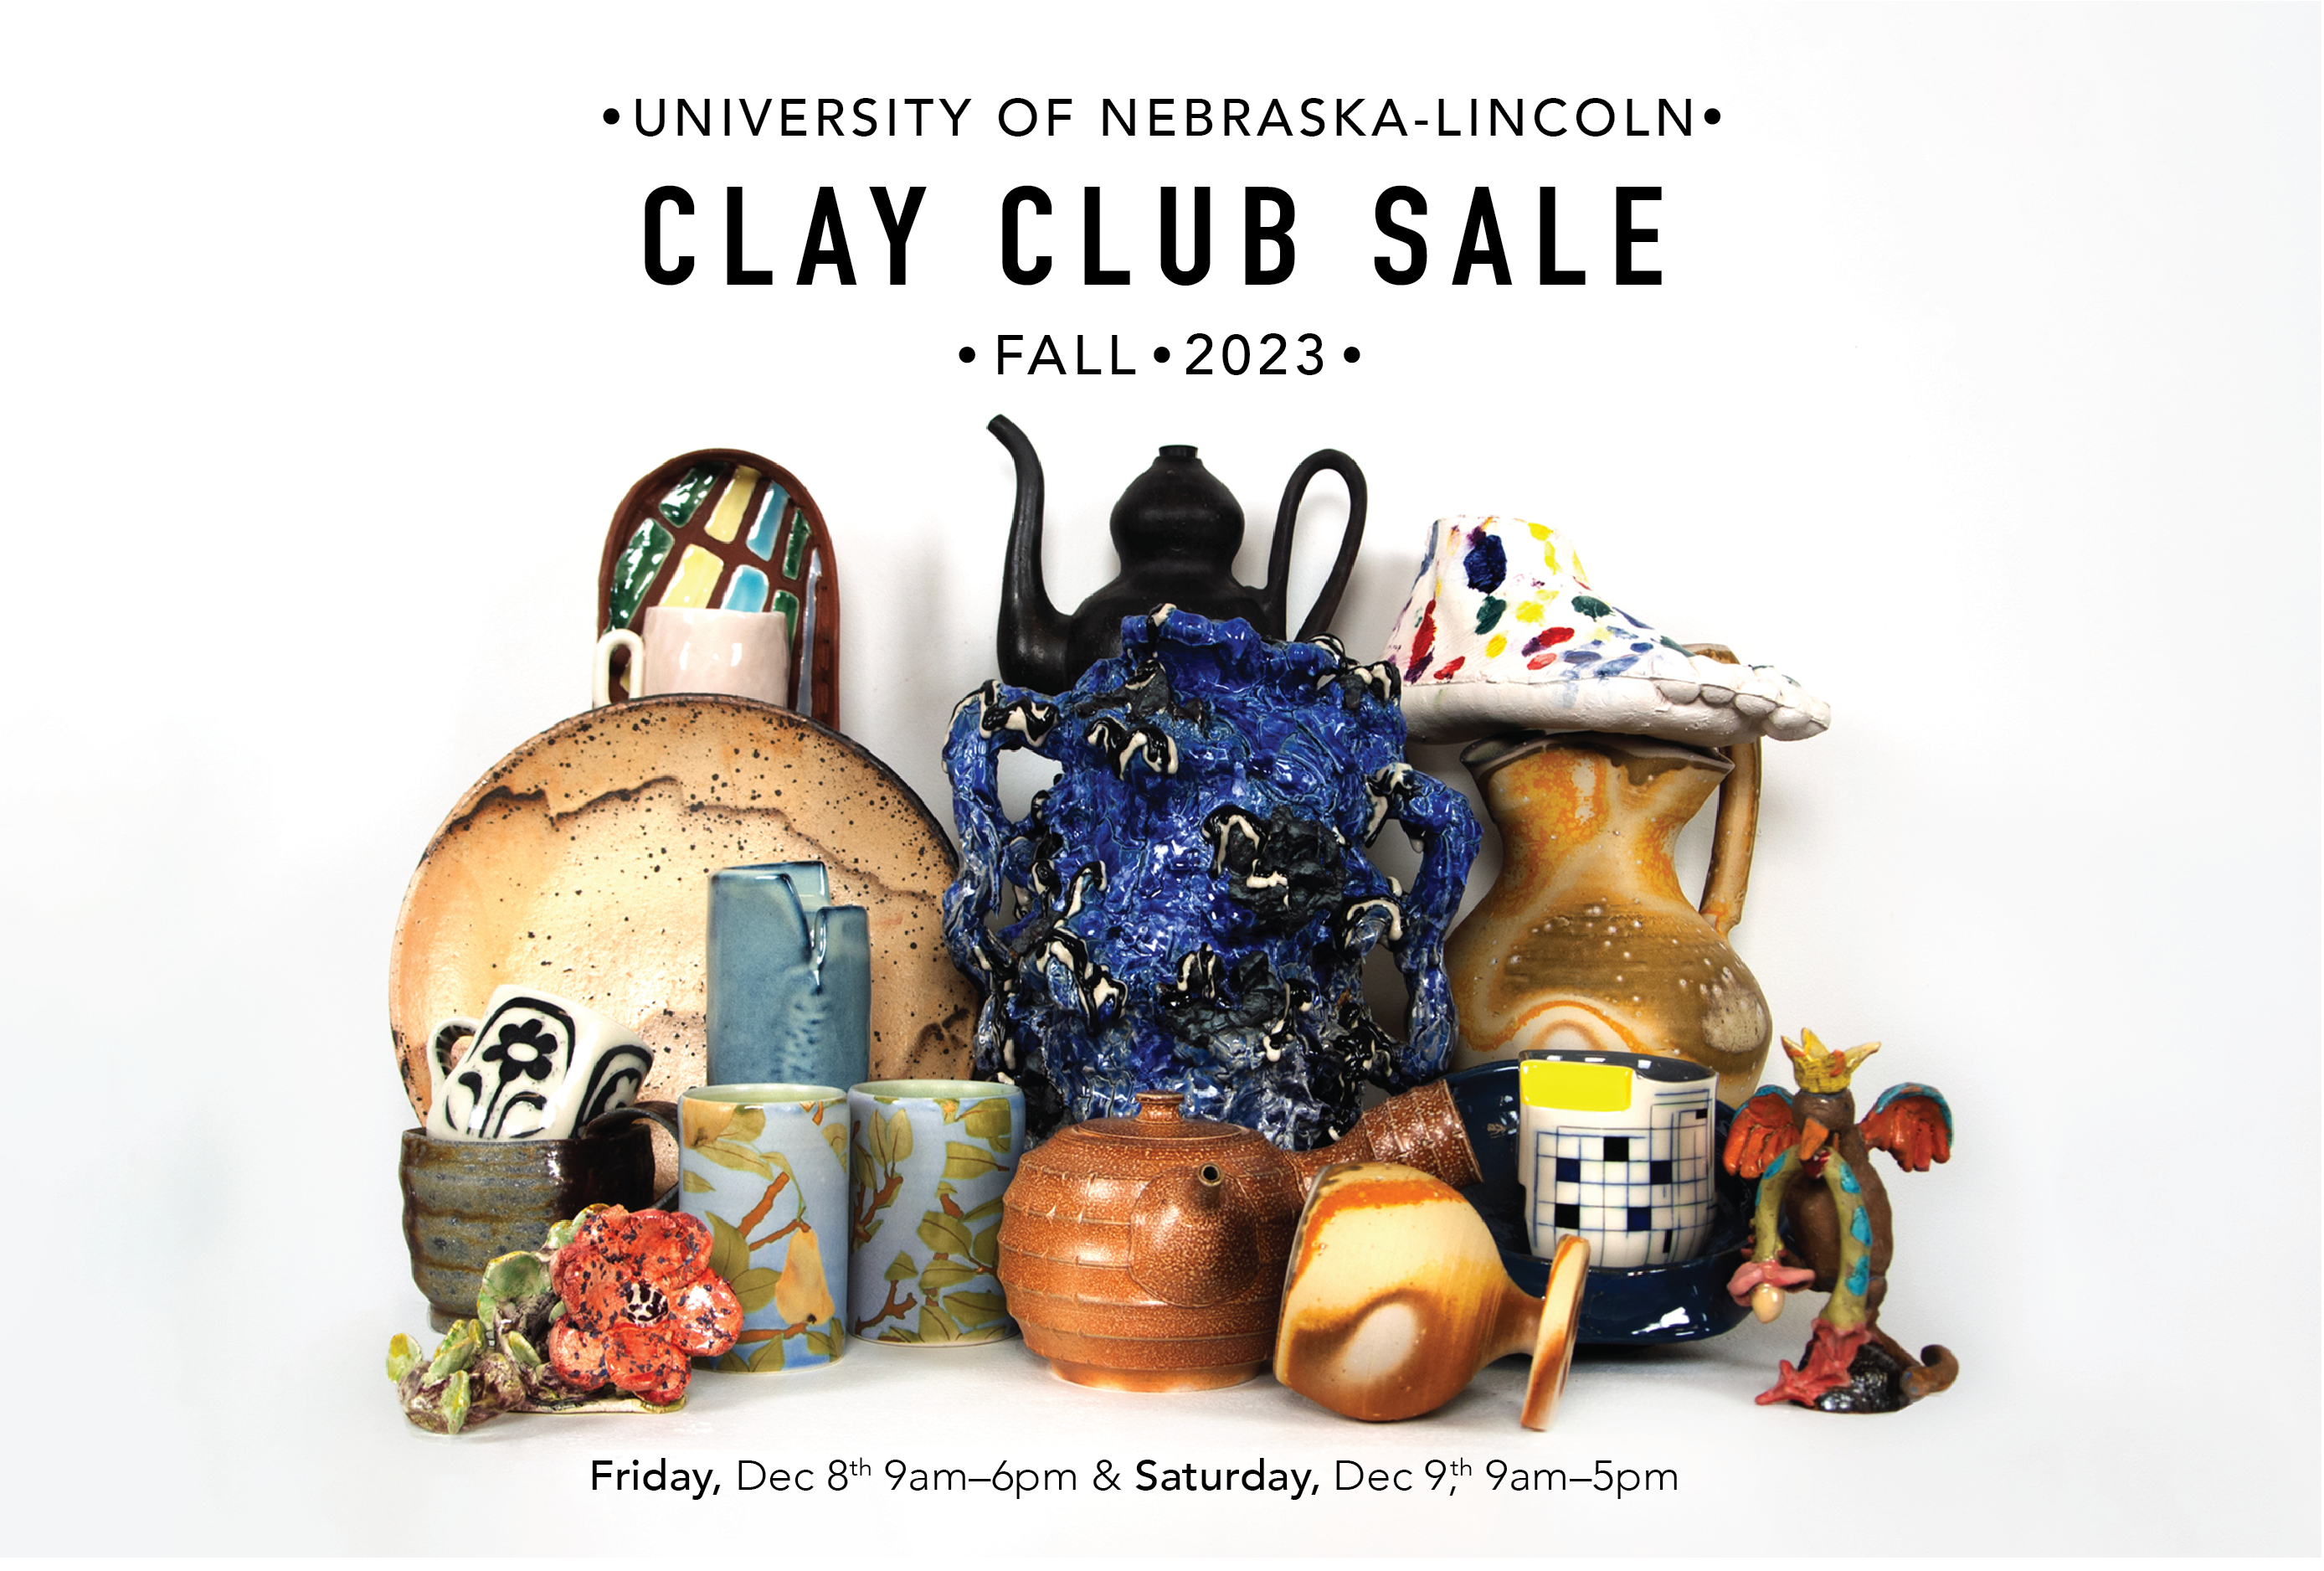 The Clay Club’s fall sale is Dec. 8-9 in Richards Hall Rm. 118. A photo and printmaking sale will also be held in Richards Hall.